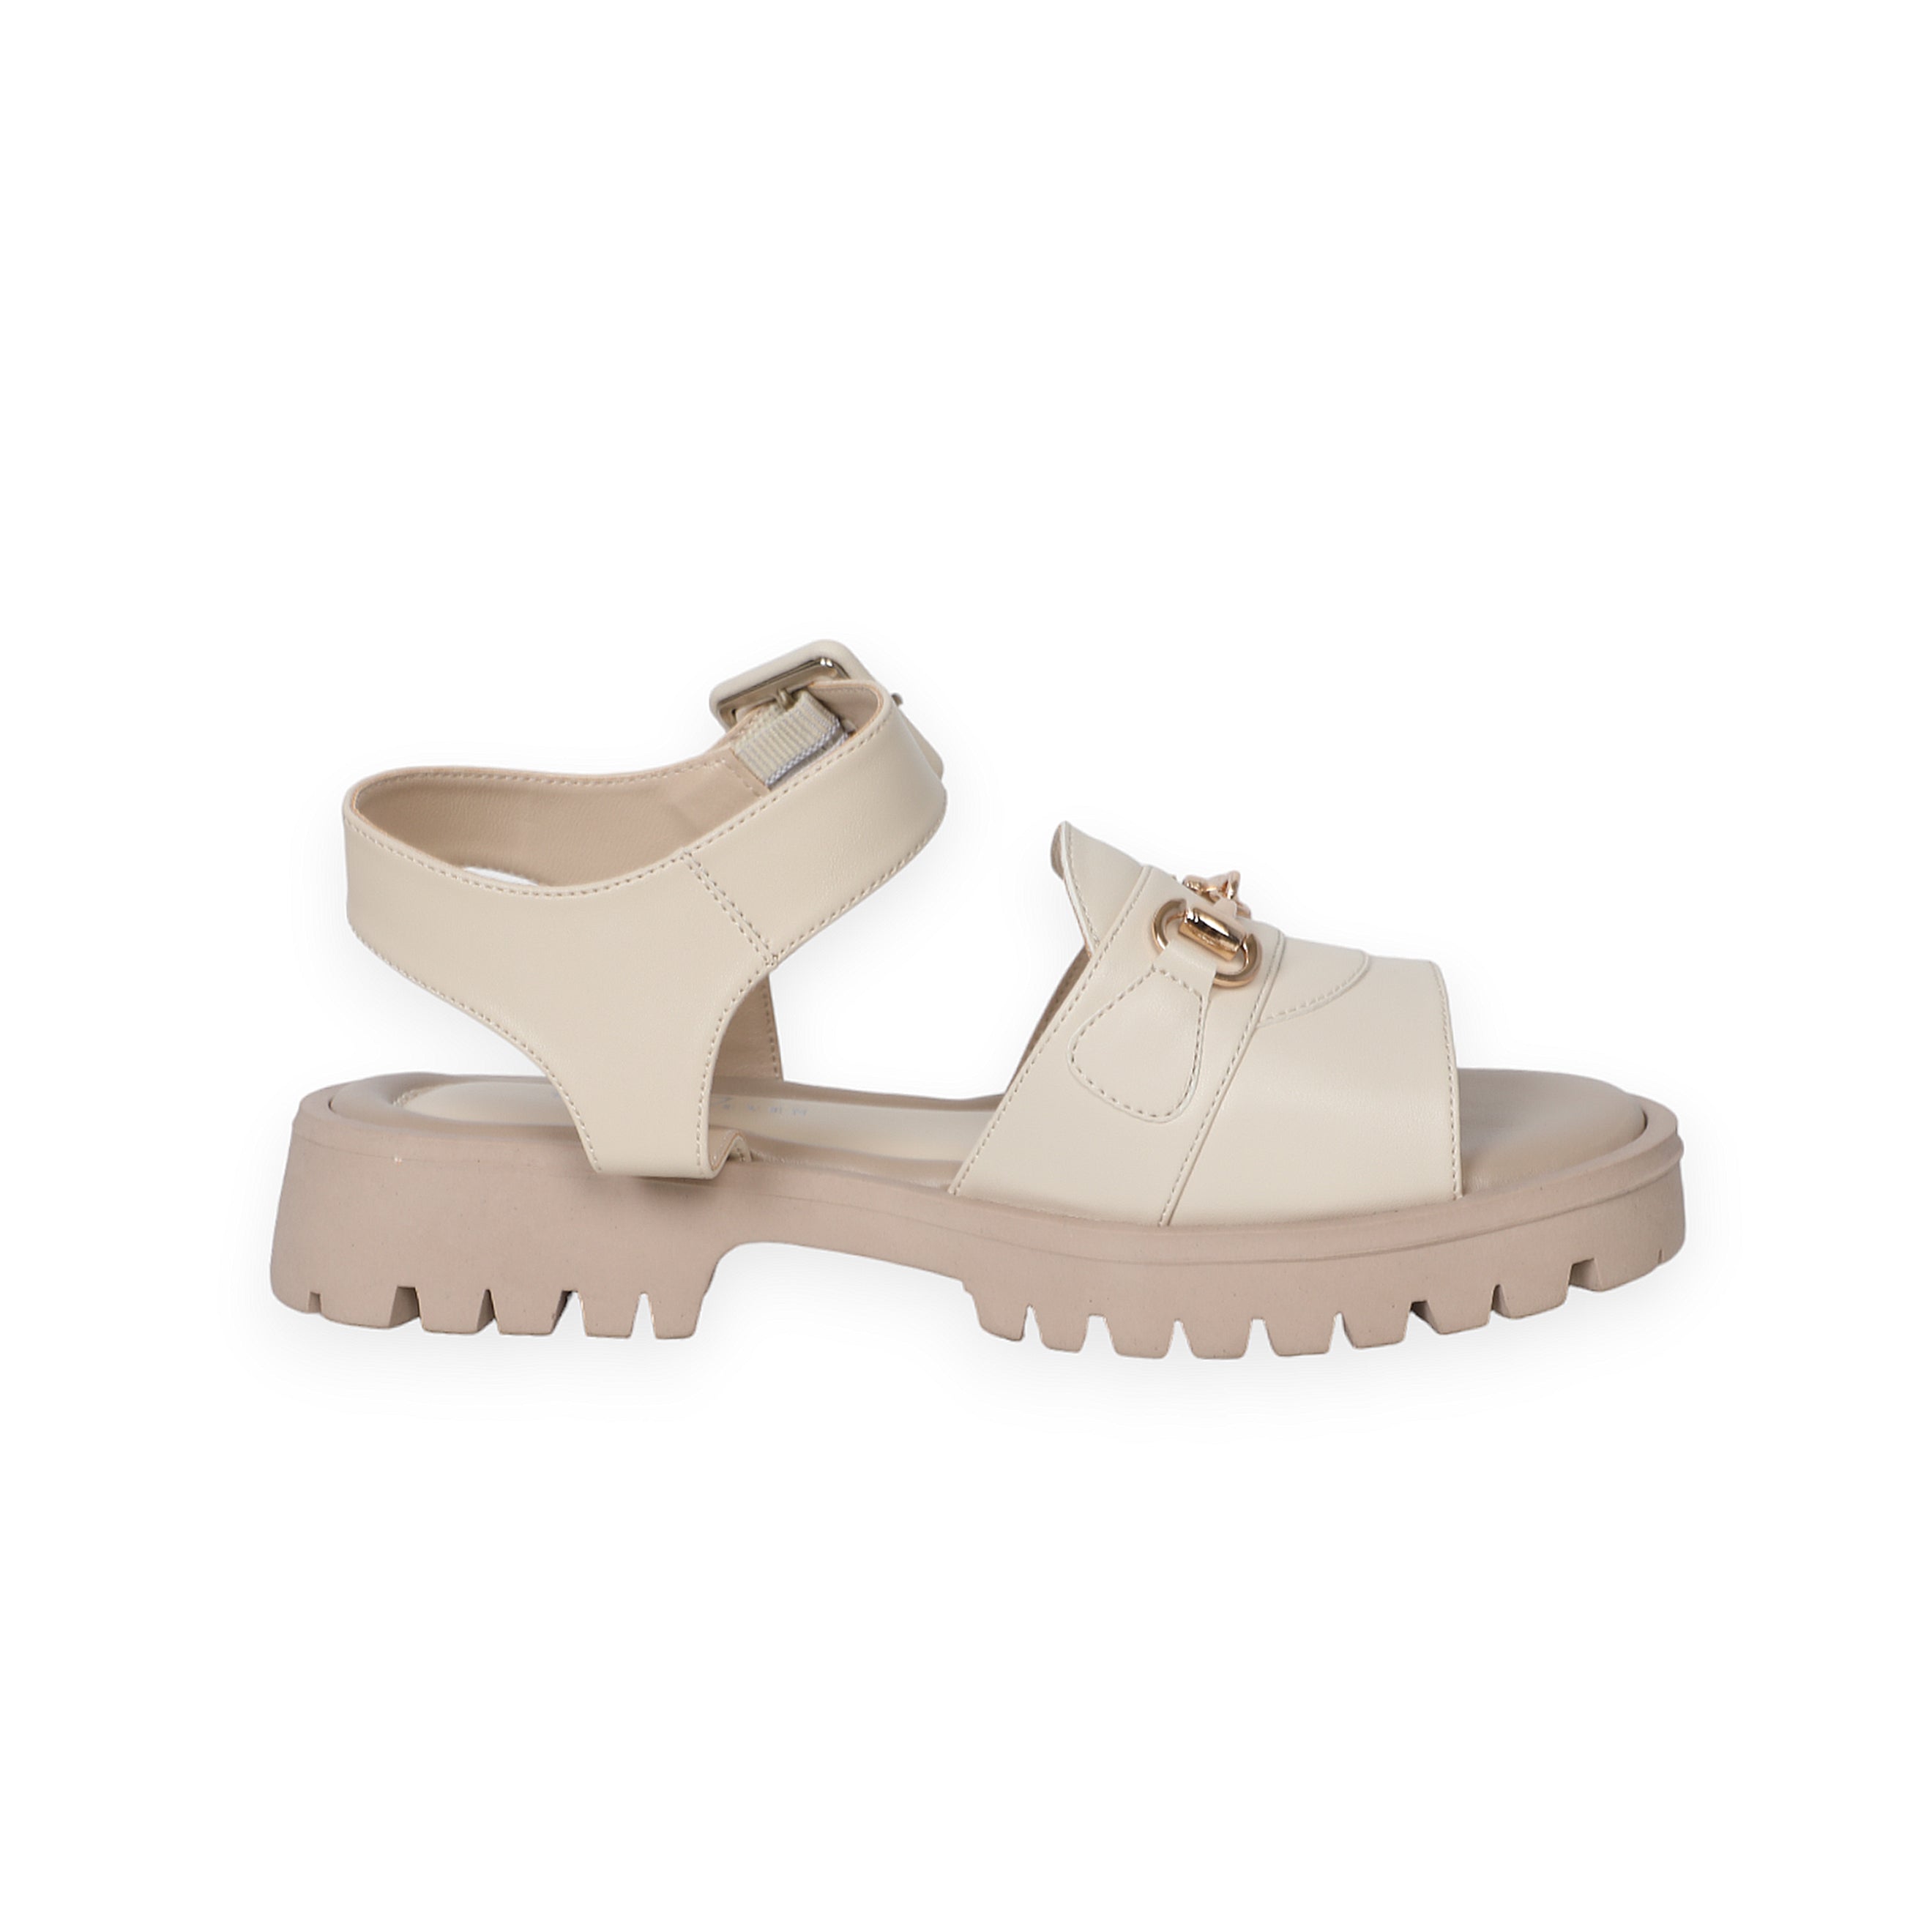 Beige Women Sandals With Sole Ankle Strap